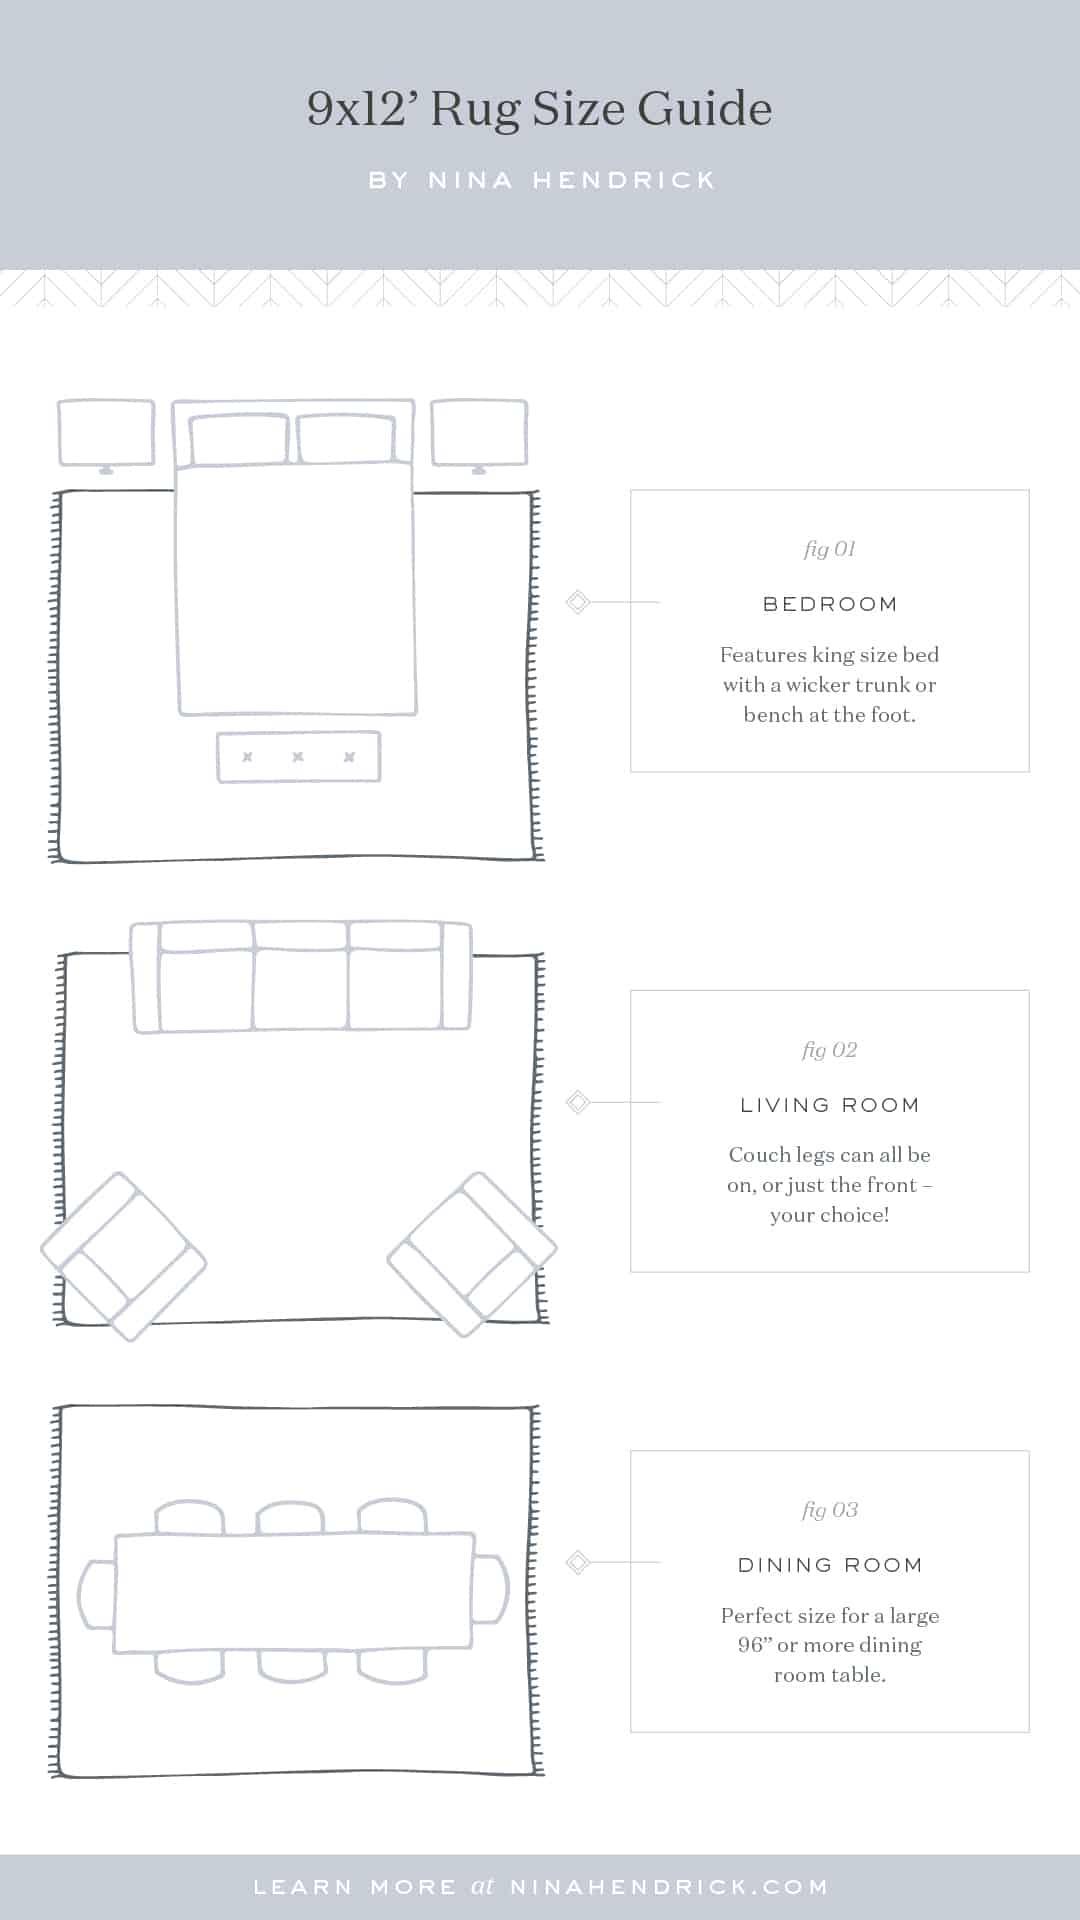 9x12' size area rug size guide graphic with tips for furniture placement in a bedroom, living room, and dining room